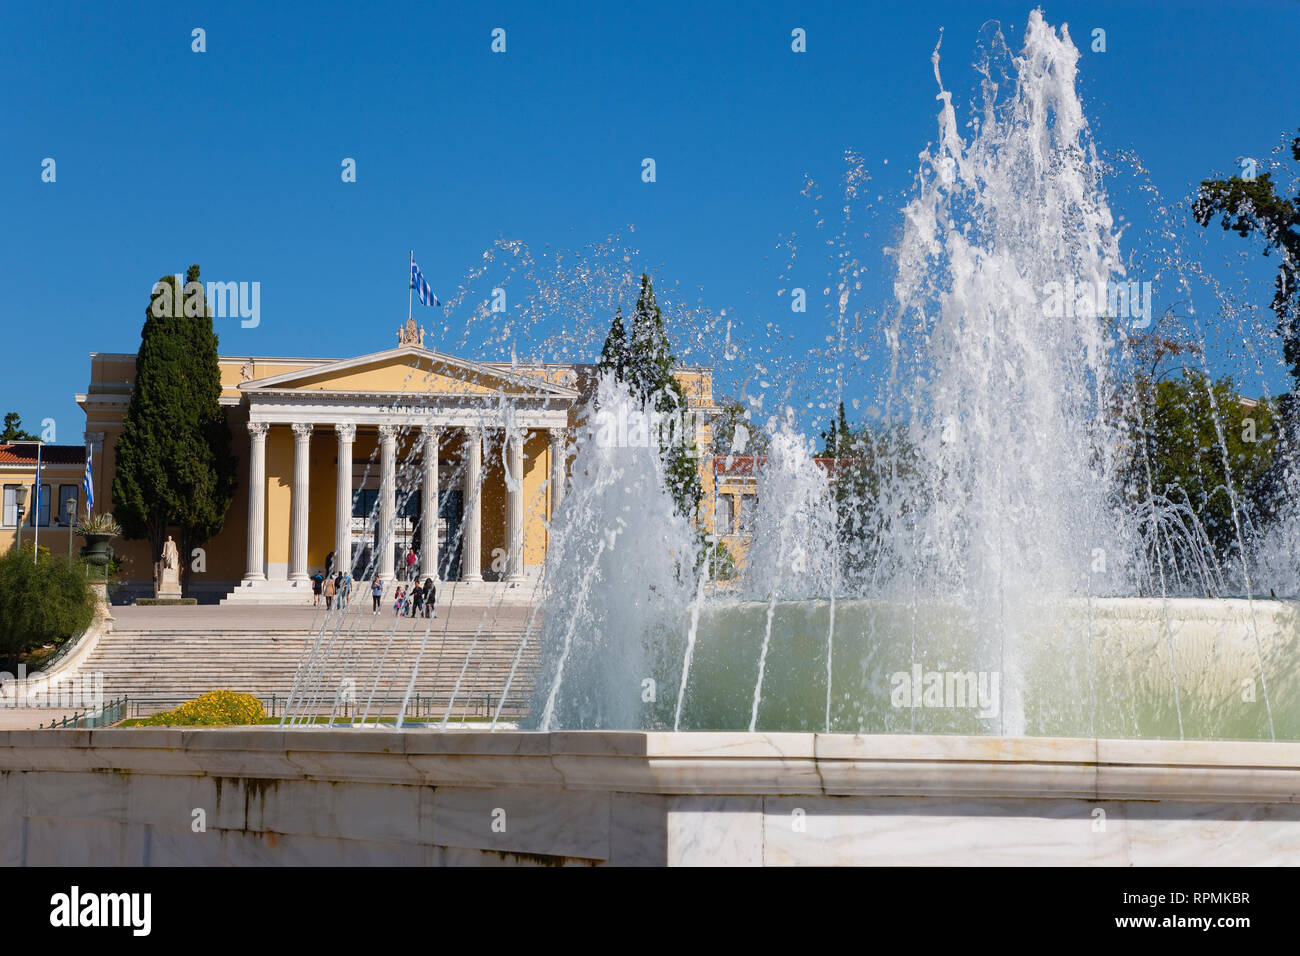 Greece, Attica, Athens, Zappeion exhibition and Congress Hall in the national gardens. Stock Photo